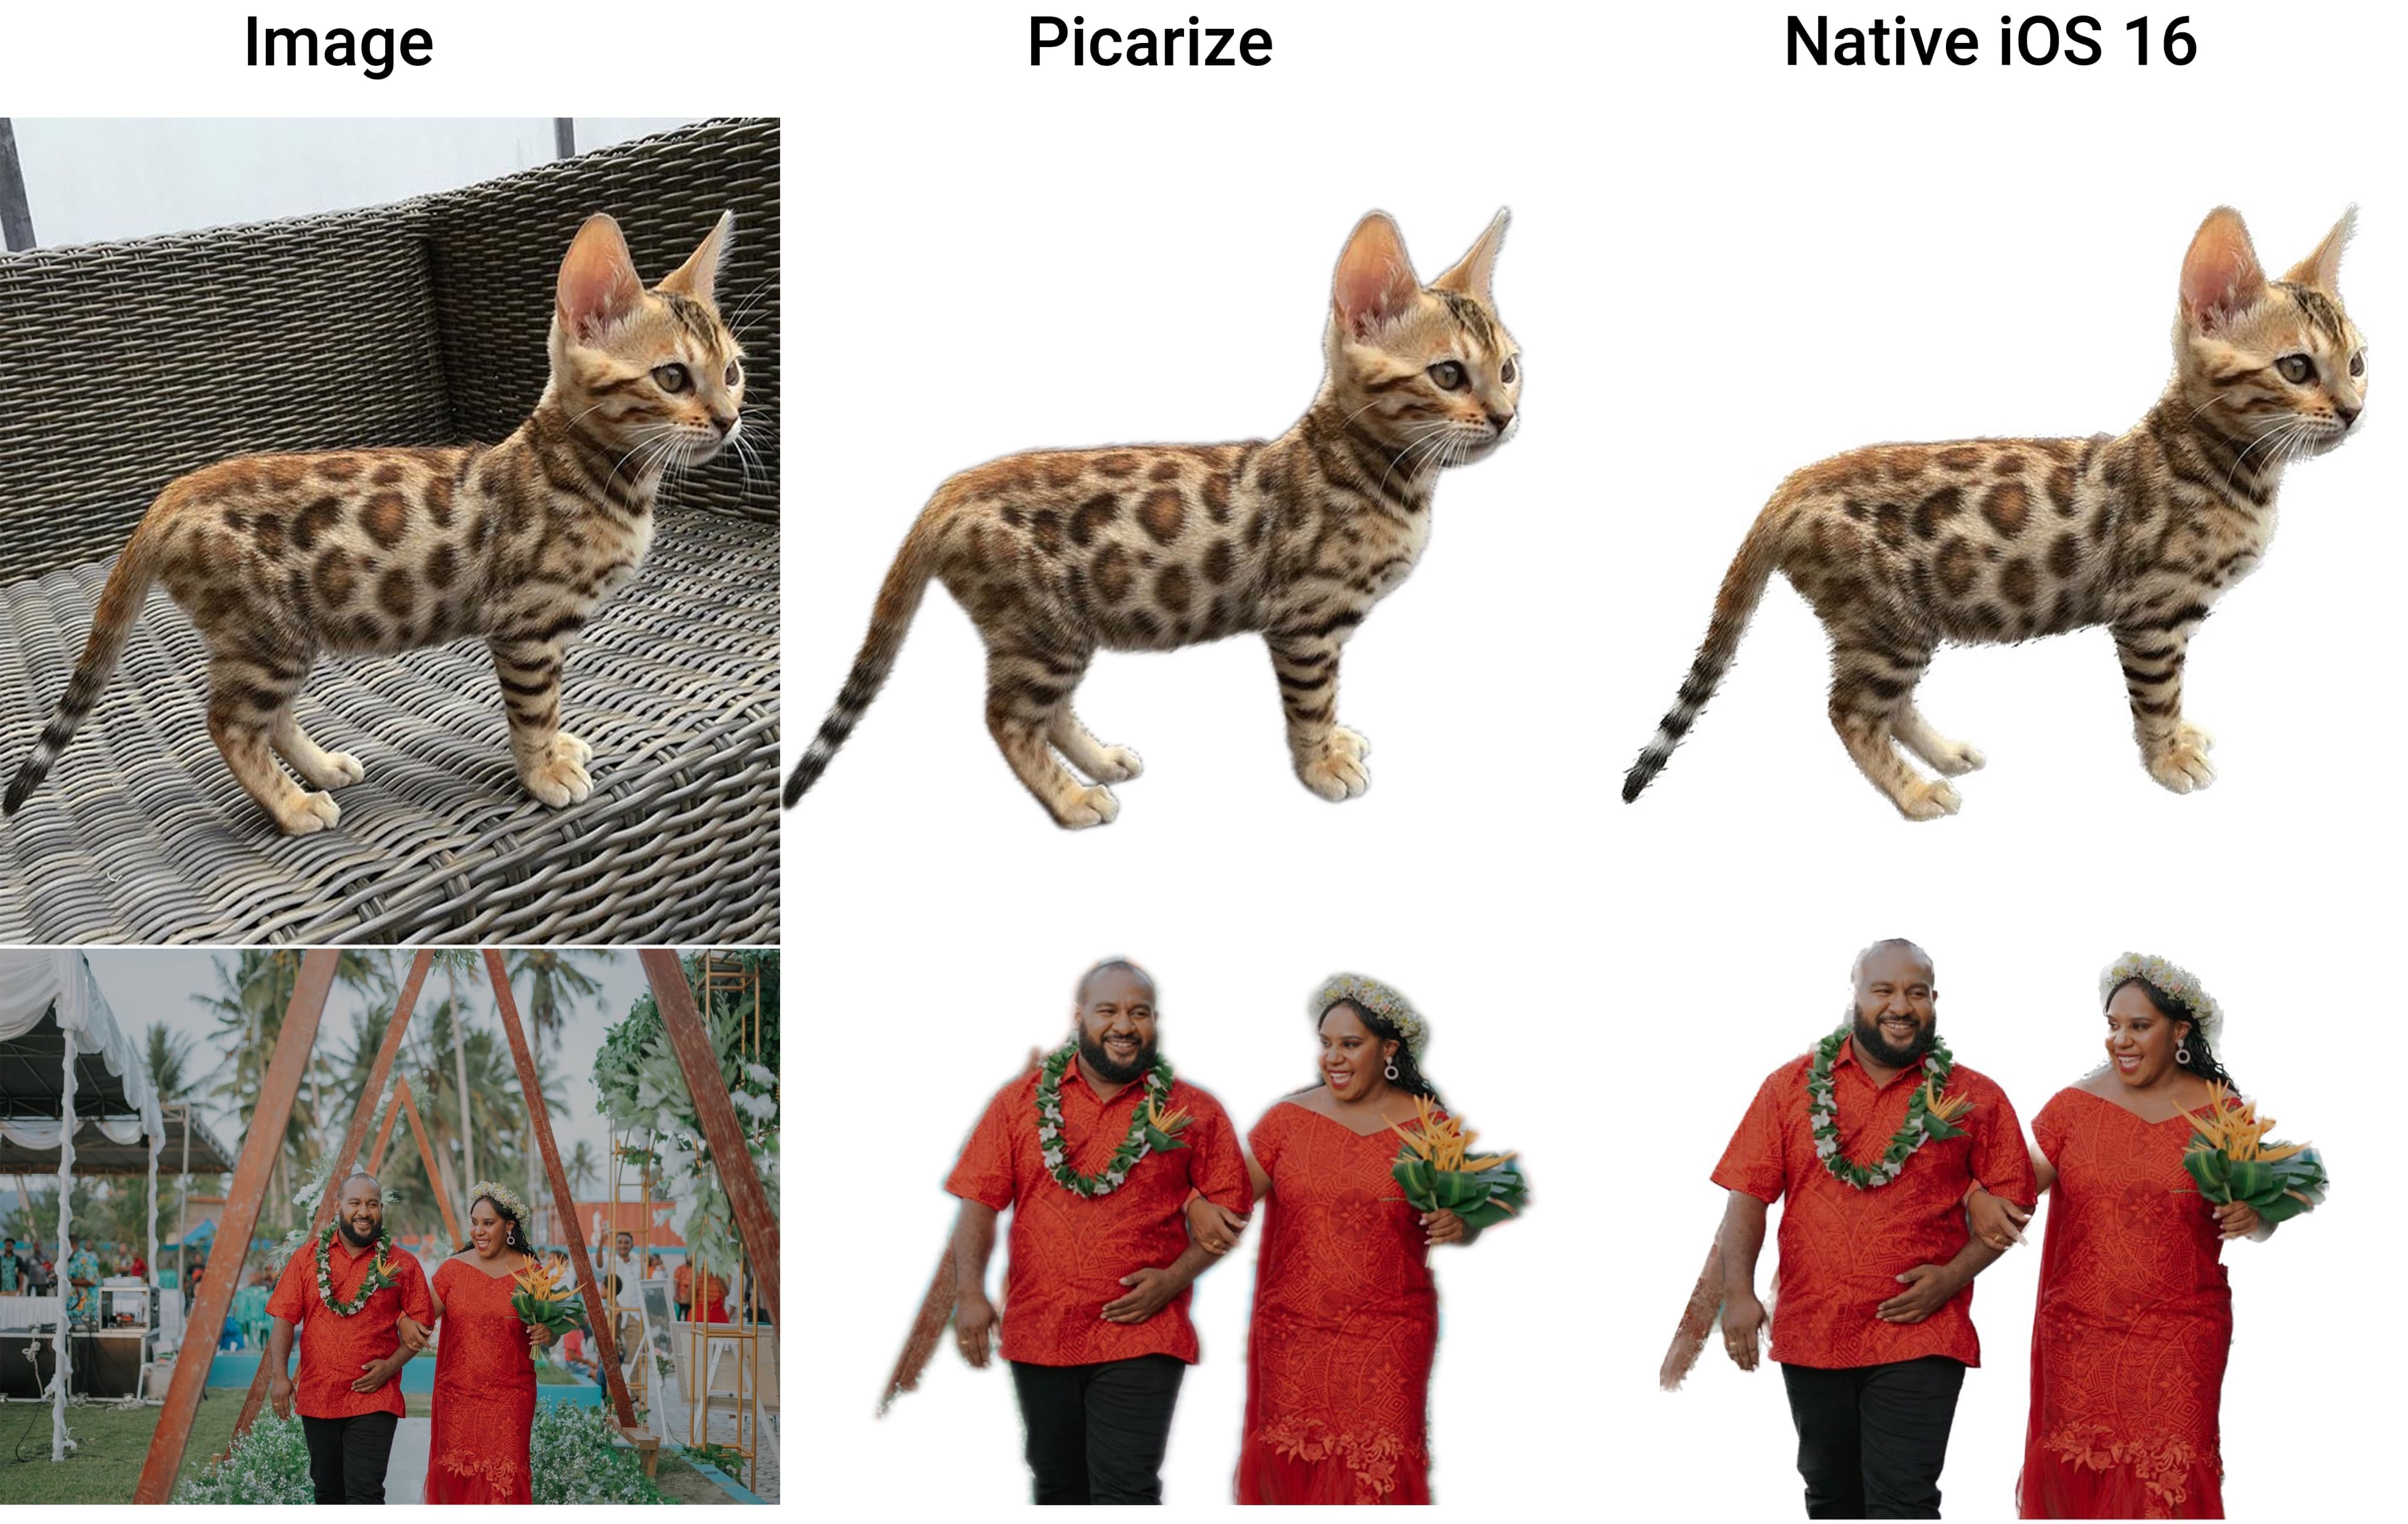 Picarize examples compared to iOS 16 native subject isolation.